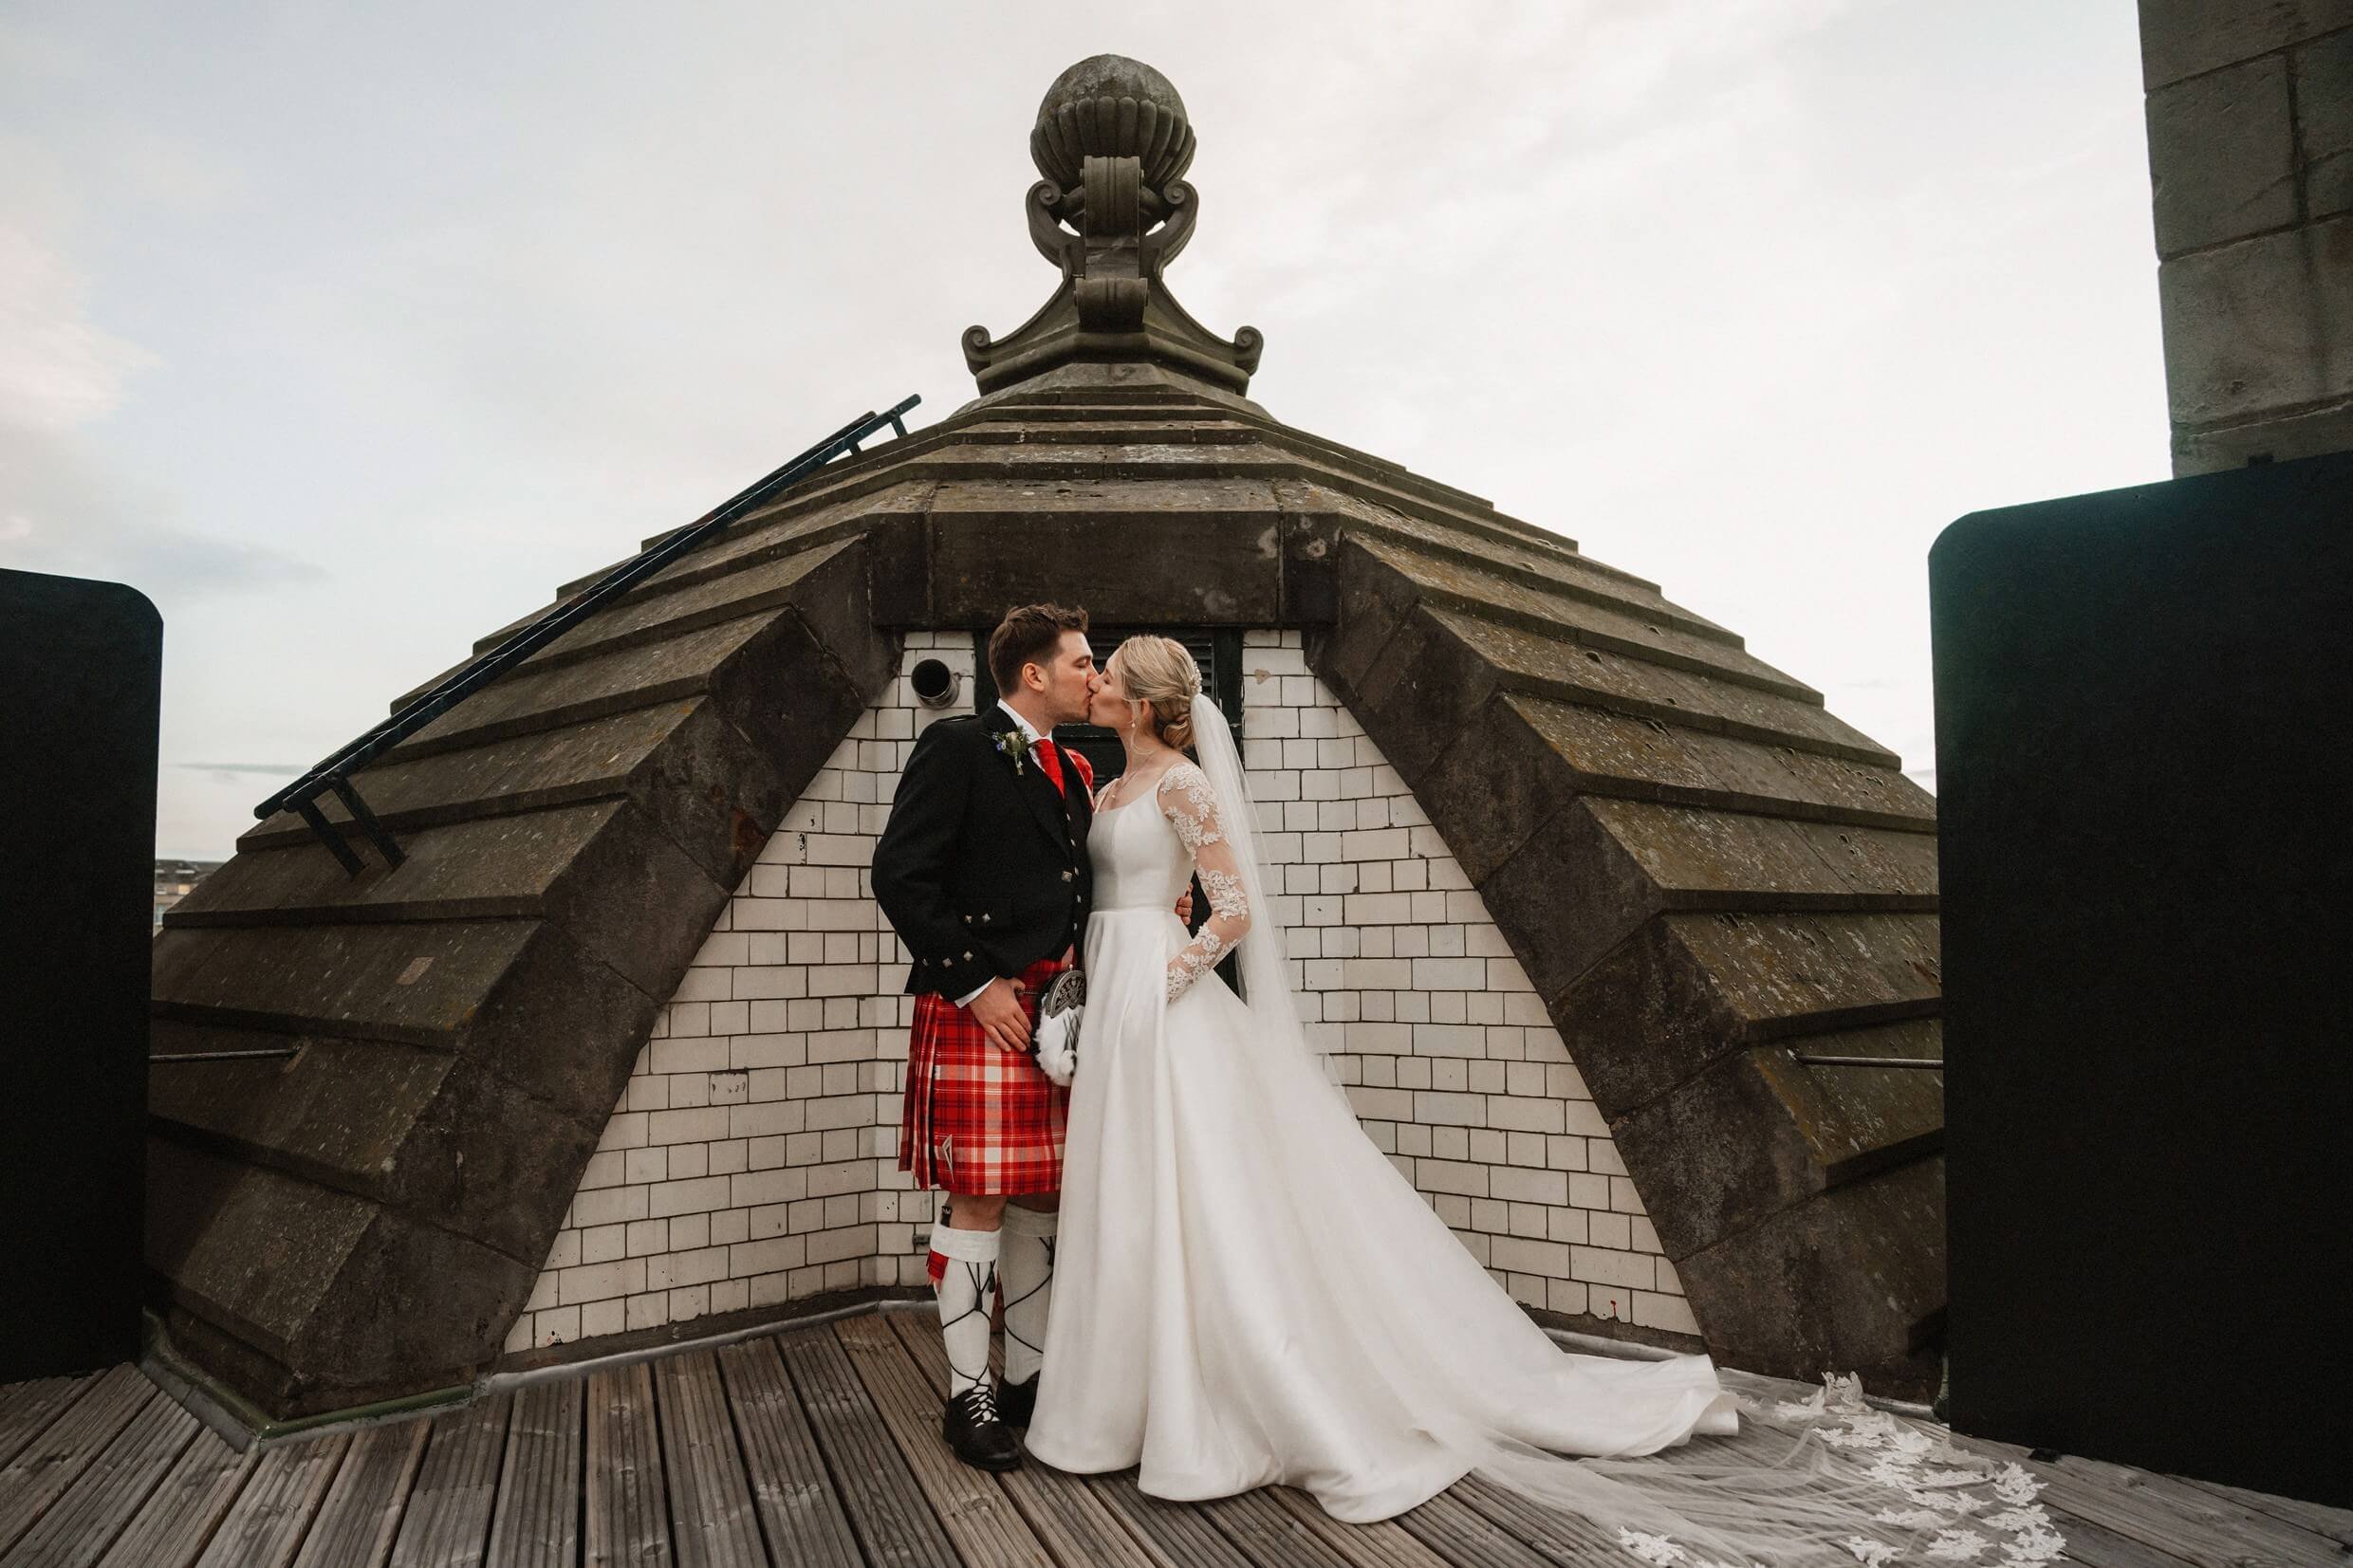 the bride and groom pose for photos on the rooftop of the balmoral hotel edinburgh wedding venue in scotland